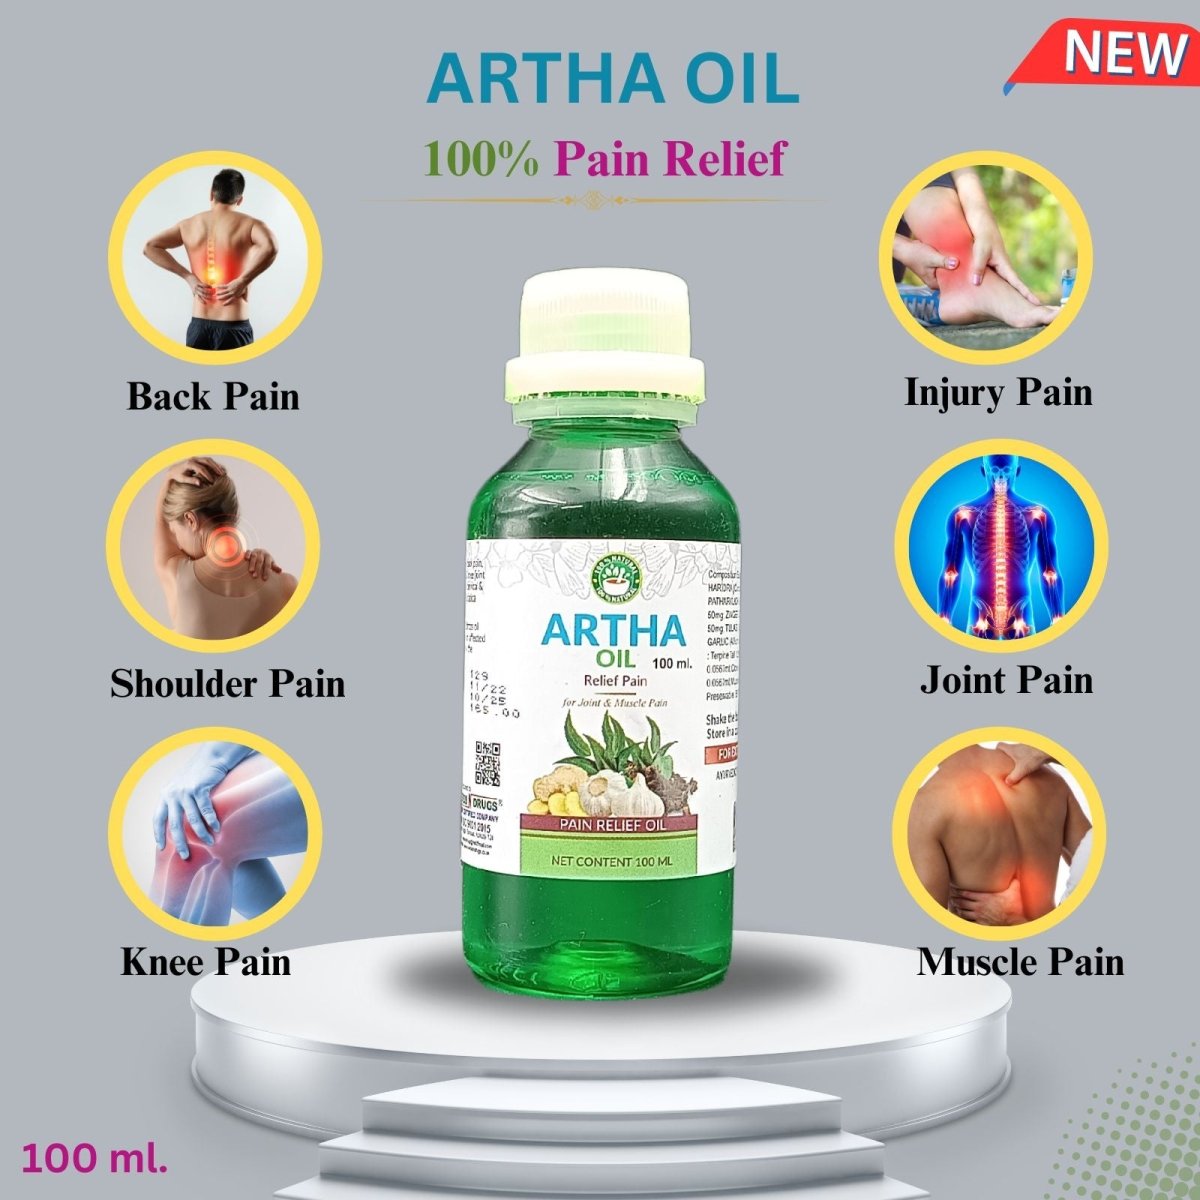 GITAAyurvedic ARTHO MASSAGE OIL for pain from joint diseases, including backaches, muscle trauma, sprains, arthritis.